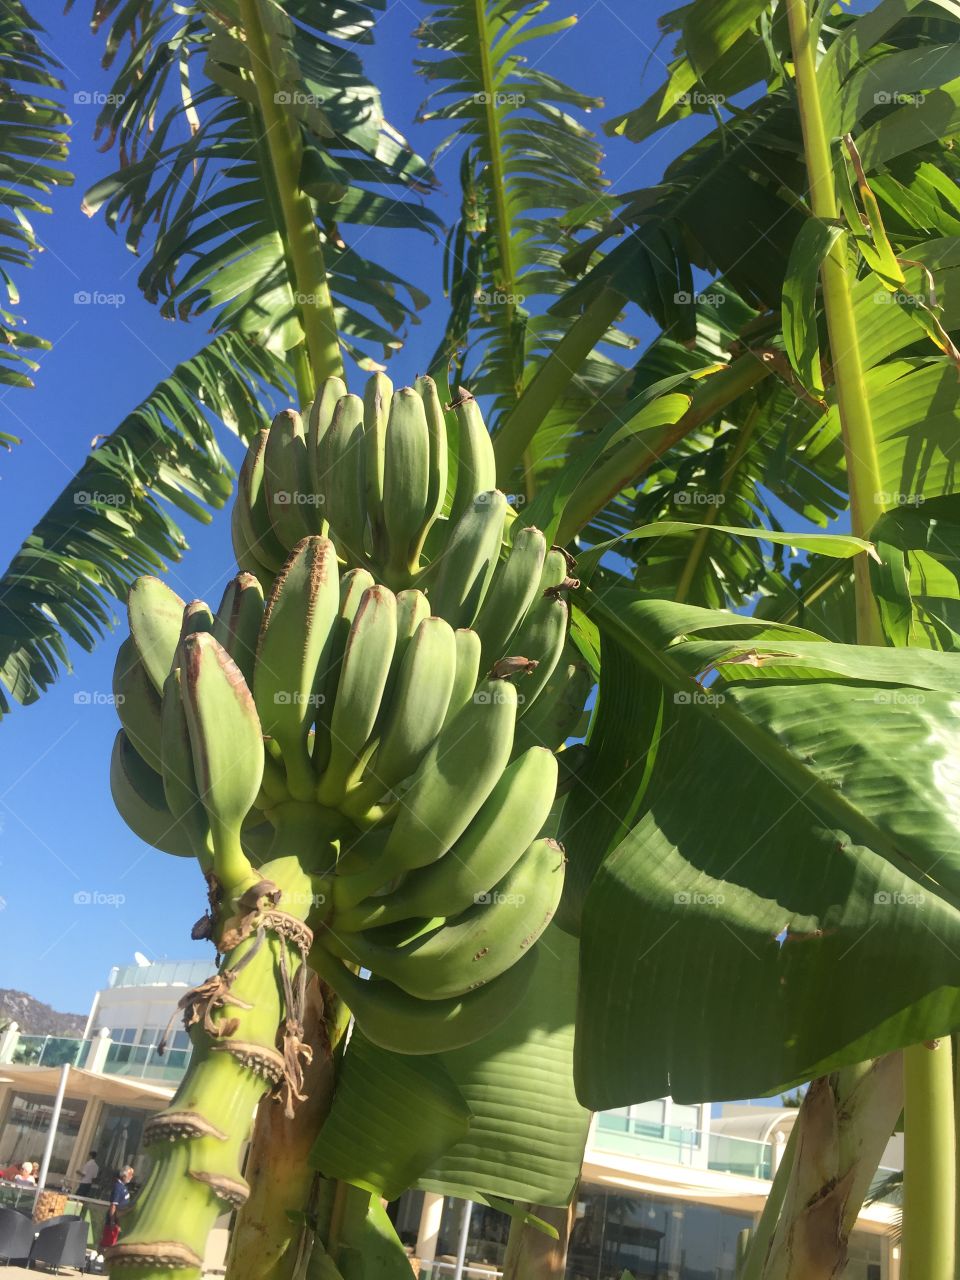 Go green. That’s the best way to be. A bunch of baby bananas growing in Turkey; Europe on a wonderful summer day. 